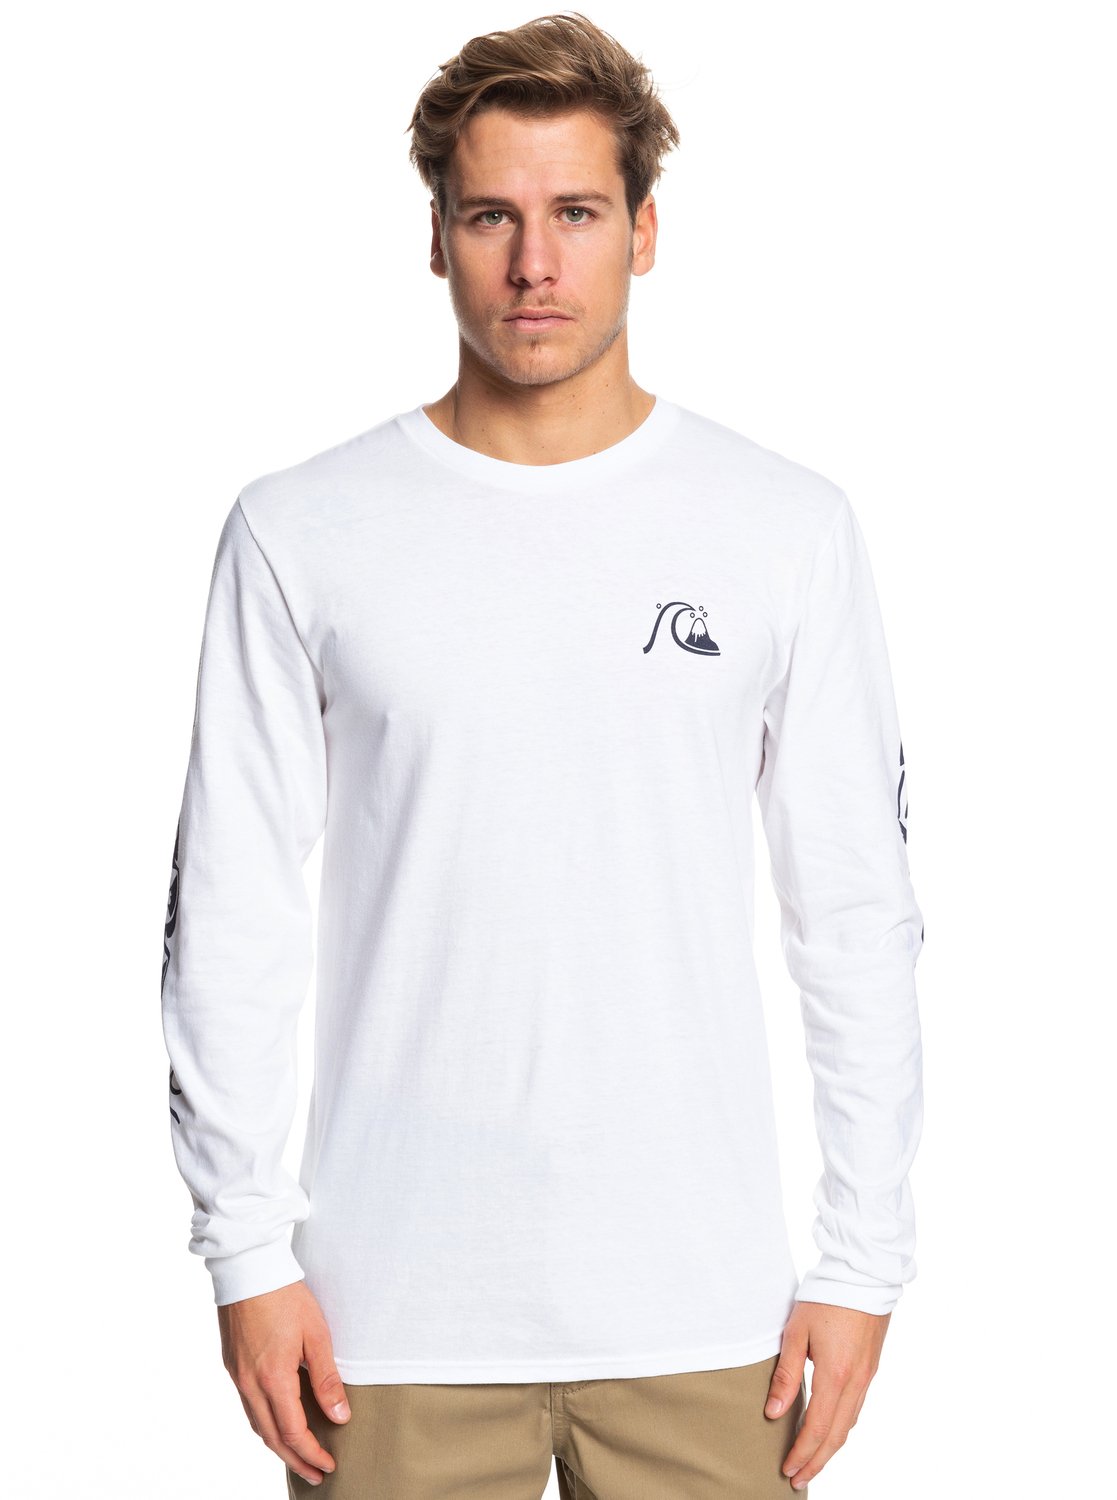 Quiksilver Too Many Rules Tee